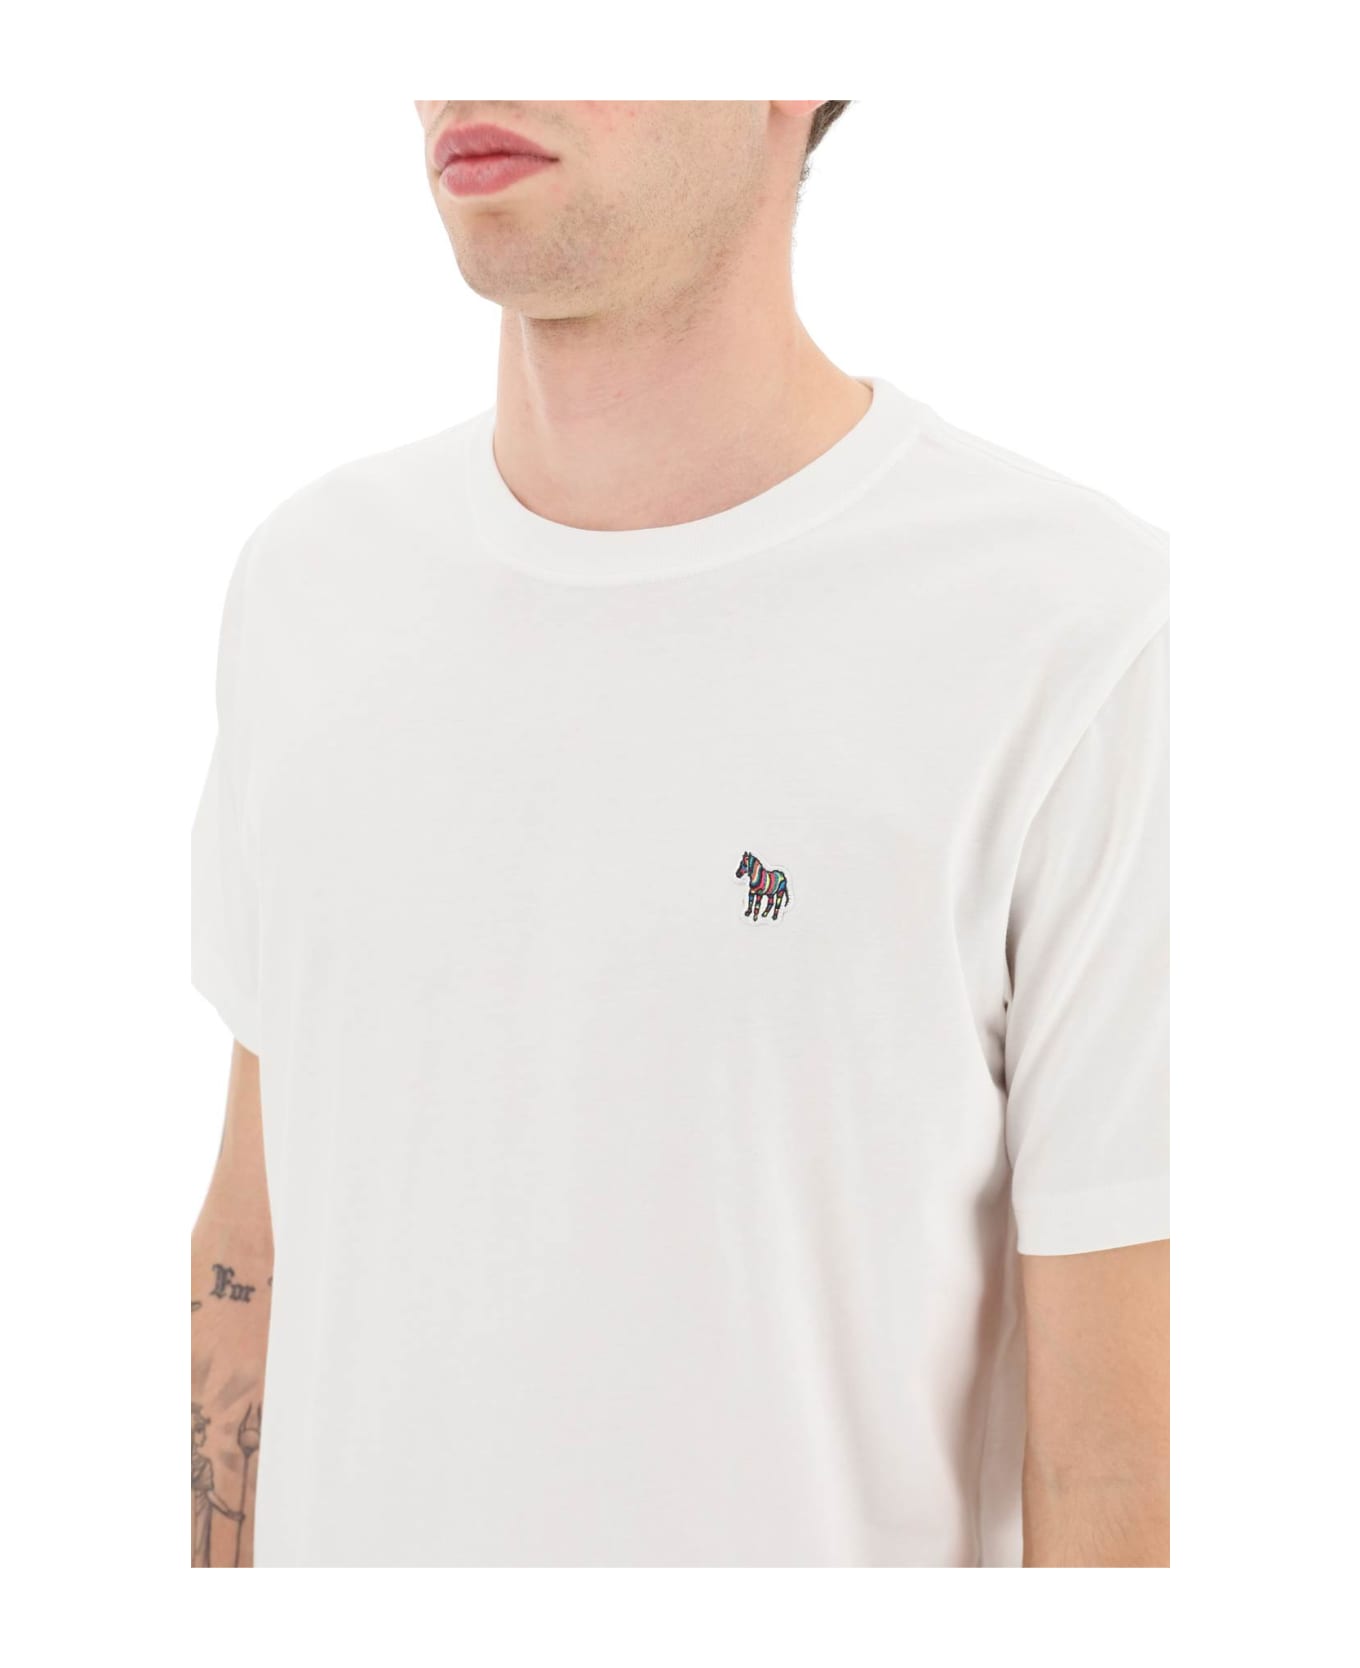 PS by Paul Smith Zebra Patch T-shirt - WHITE (White)